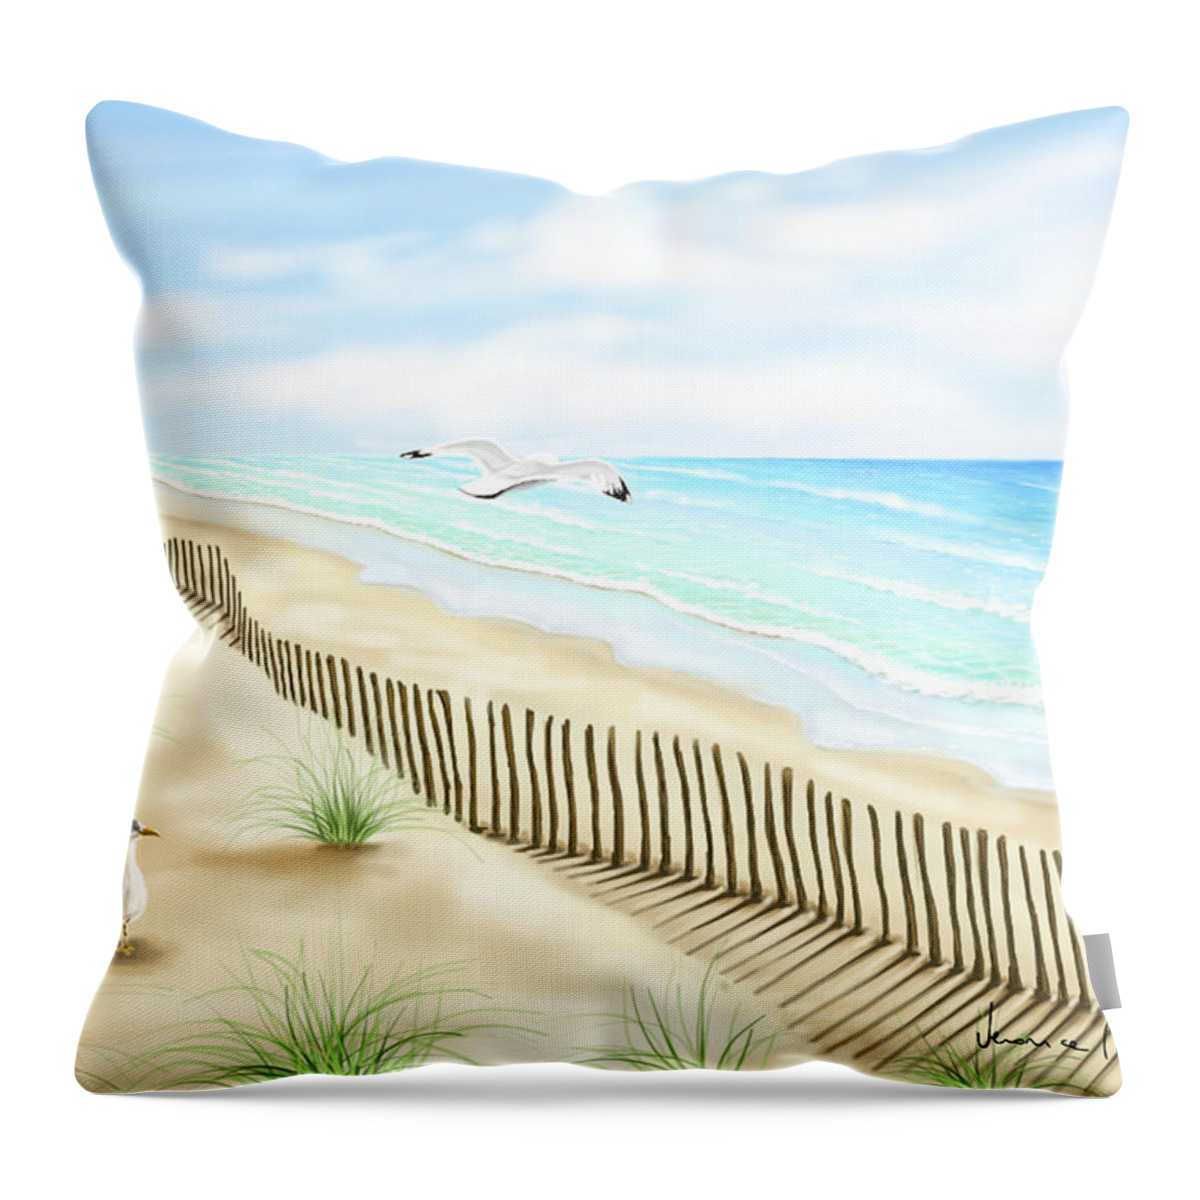 Ipad Throw Pillow featuring the painting Gulls by Veronica Minozzi